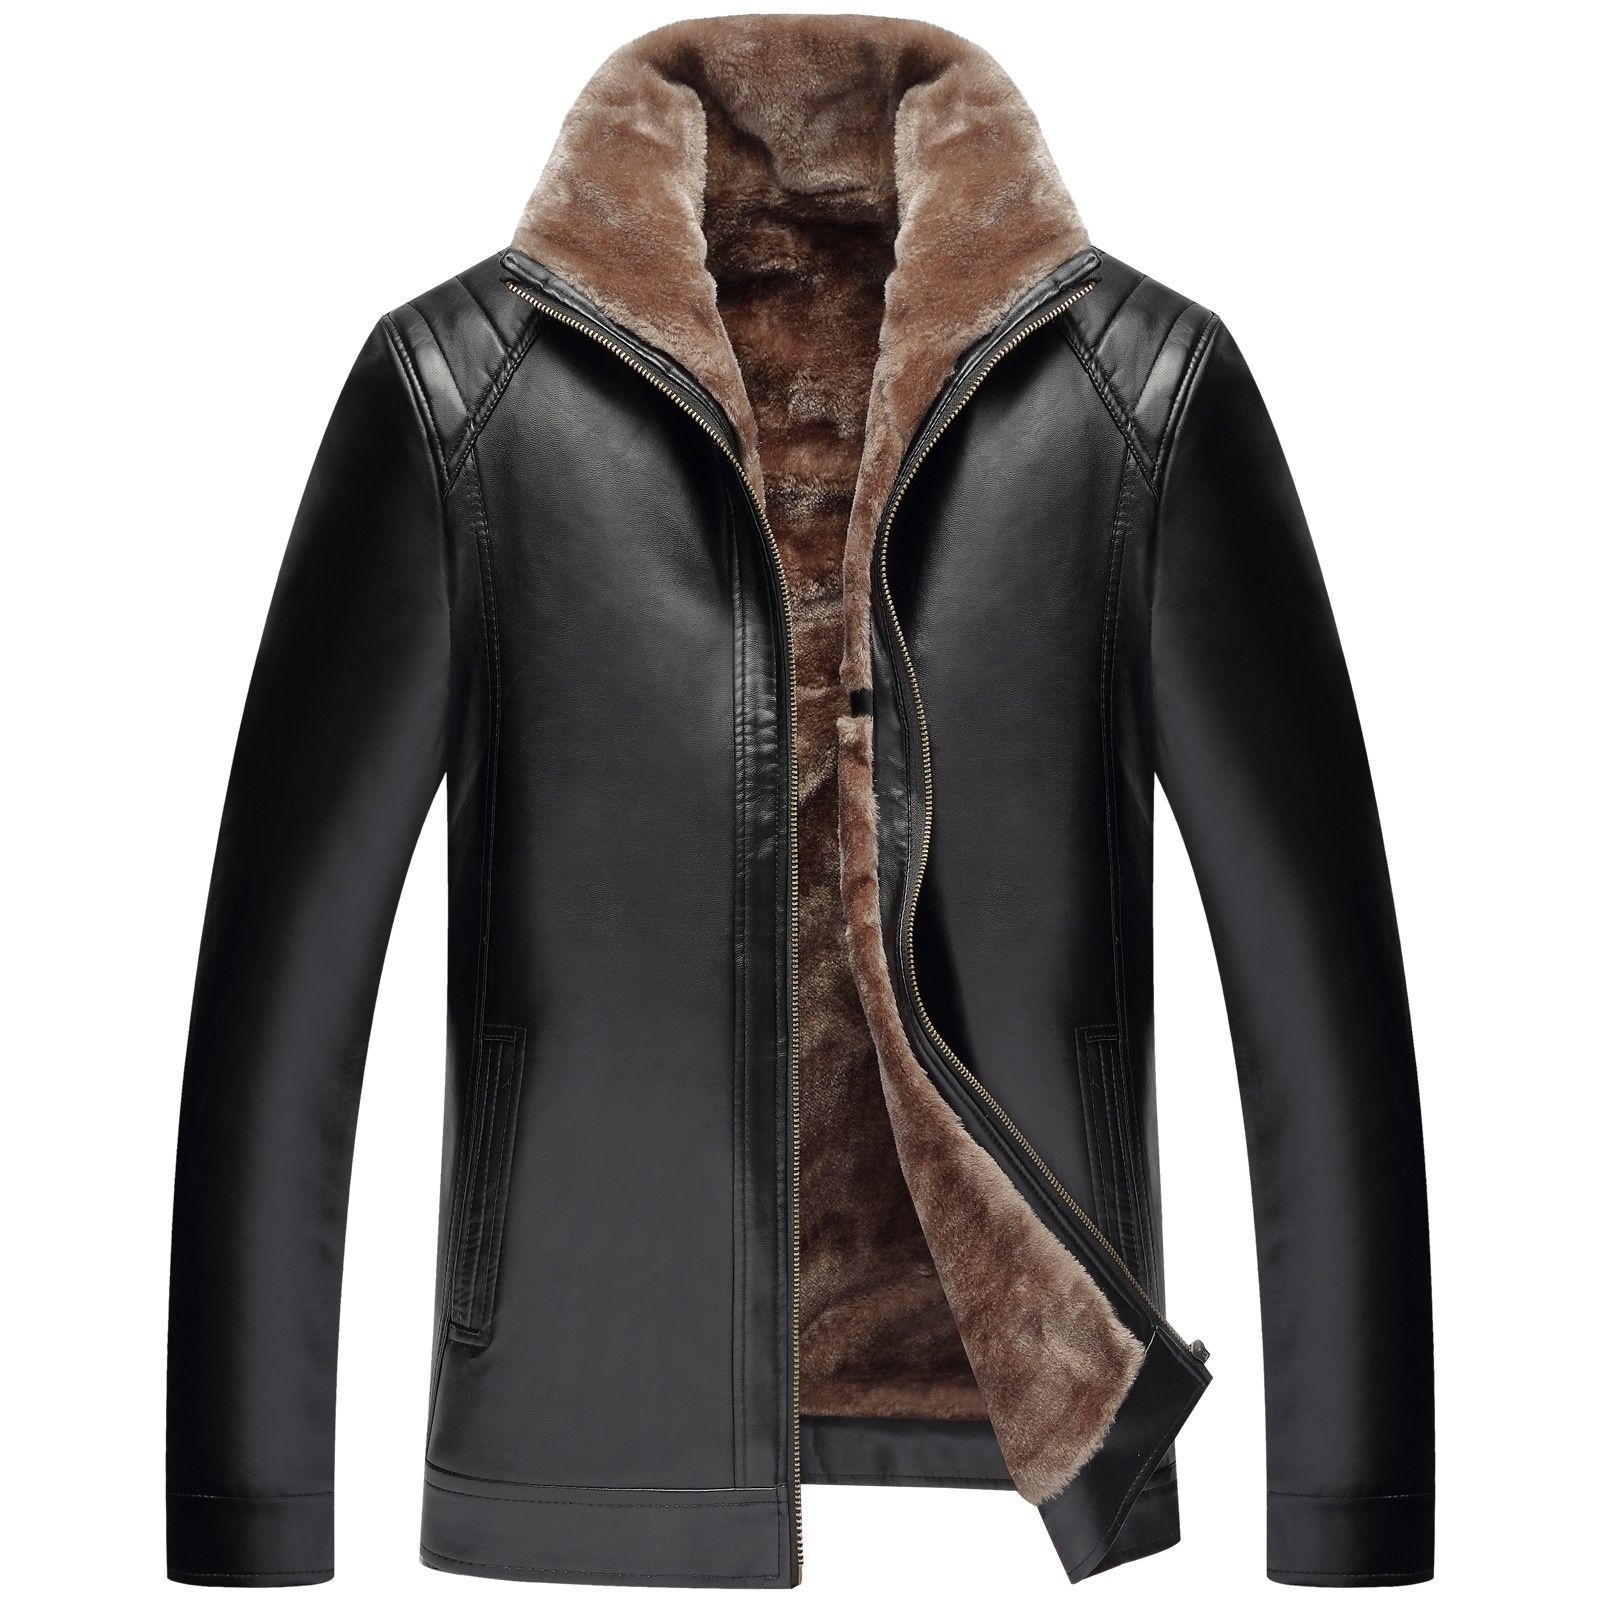 New Mens Pu Leather Fur Lined Collar Winter Jacket Man Casual Sheep ...